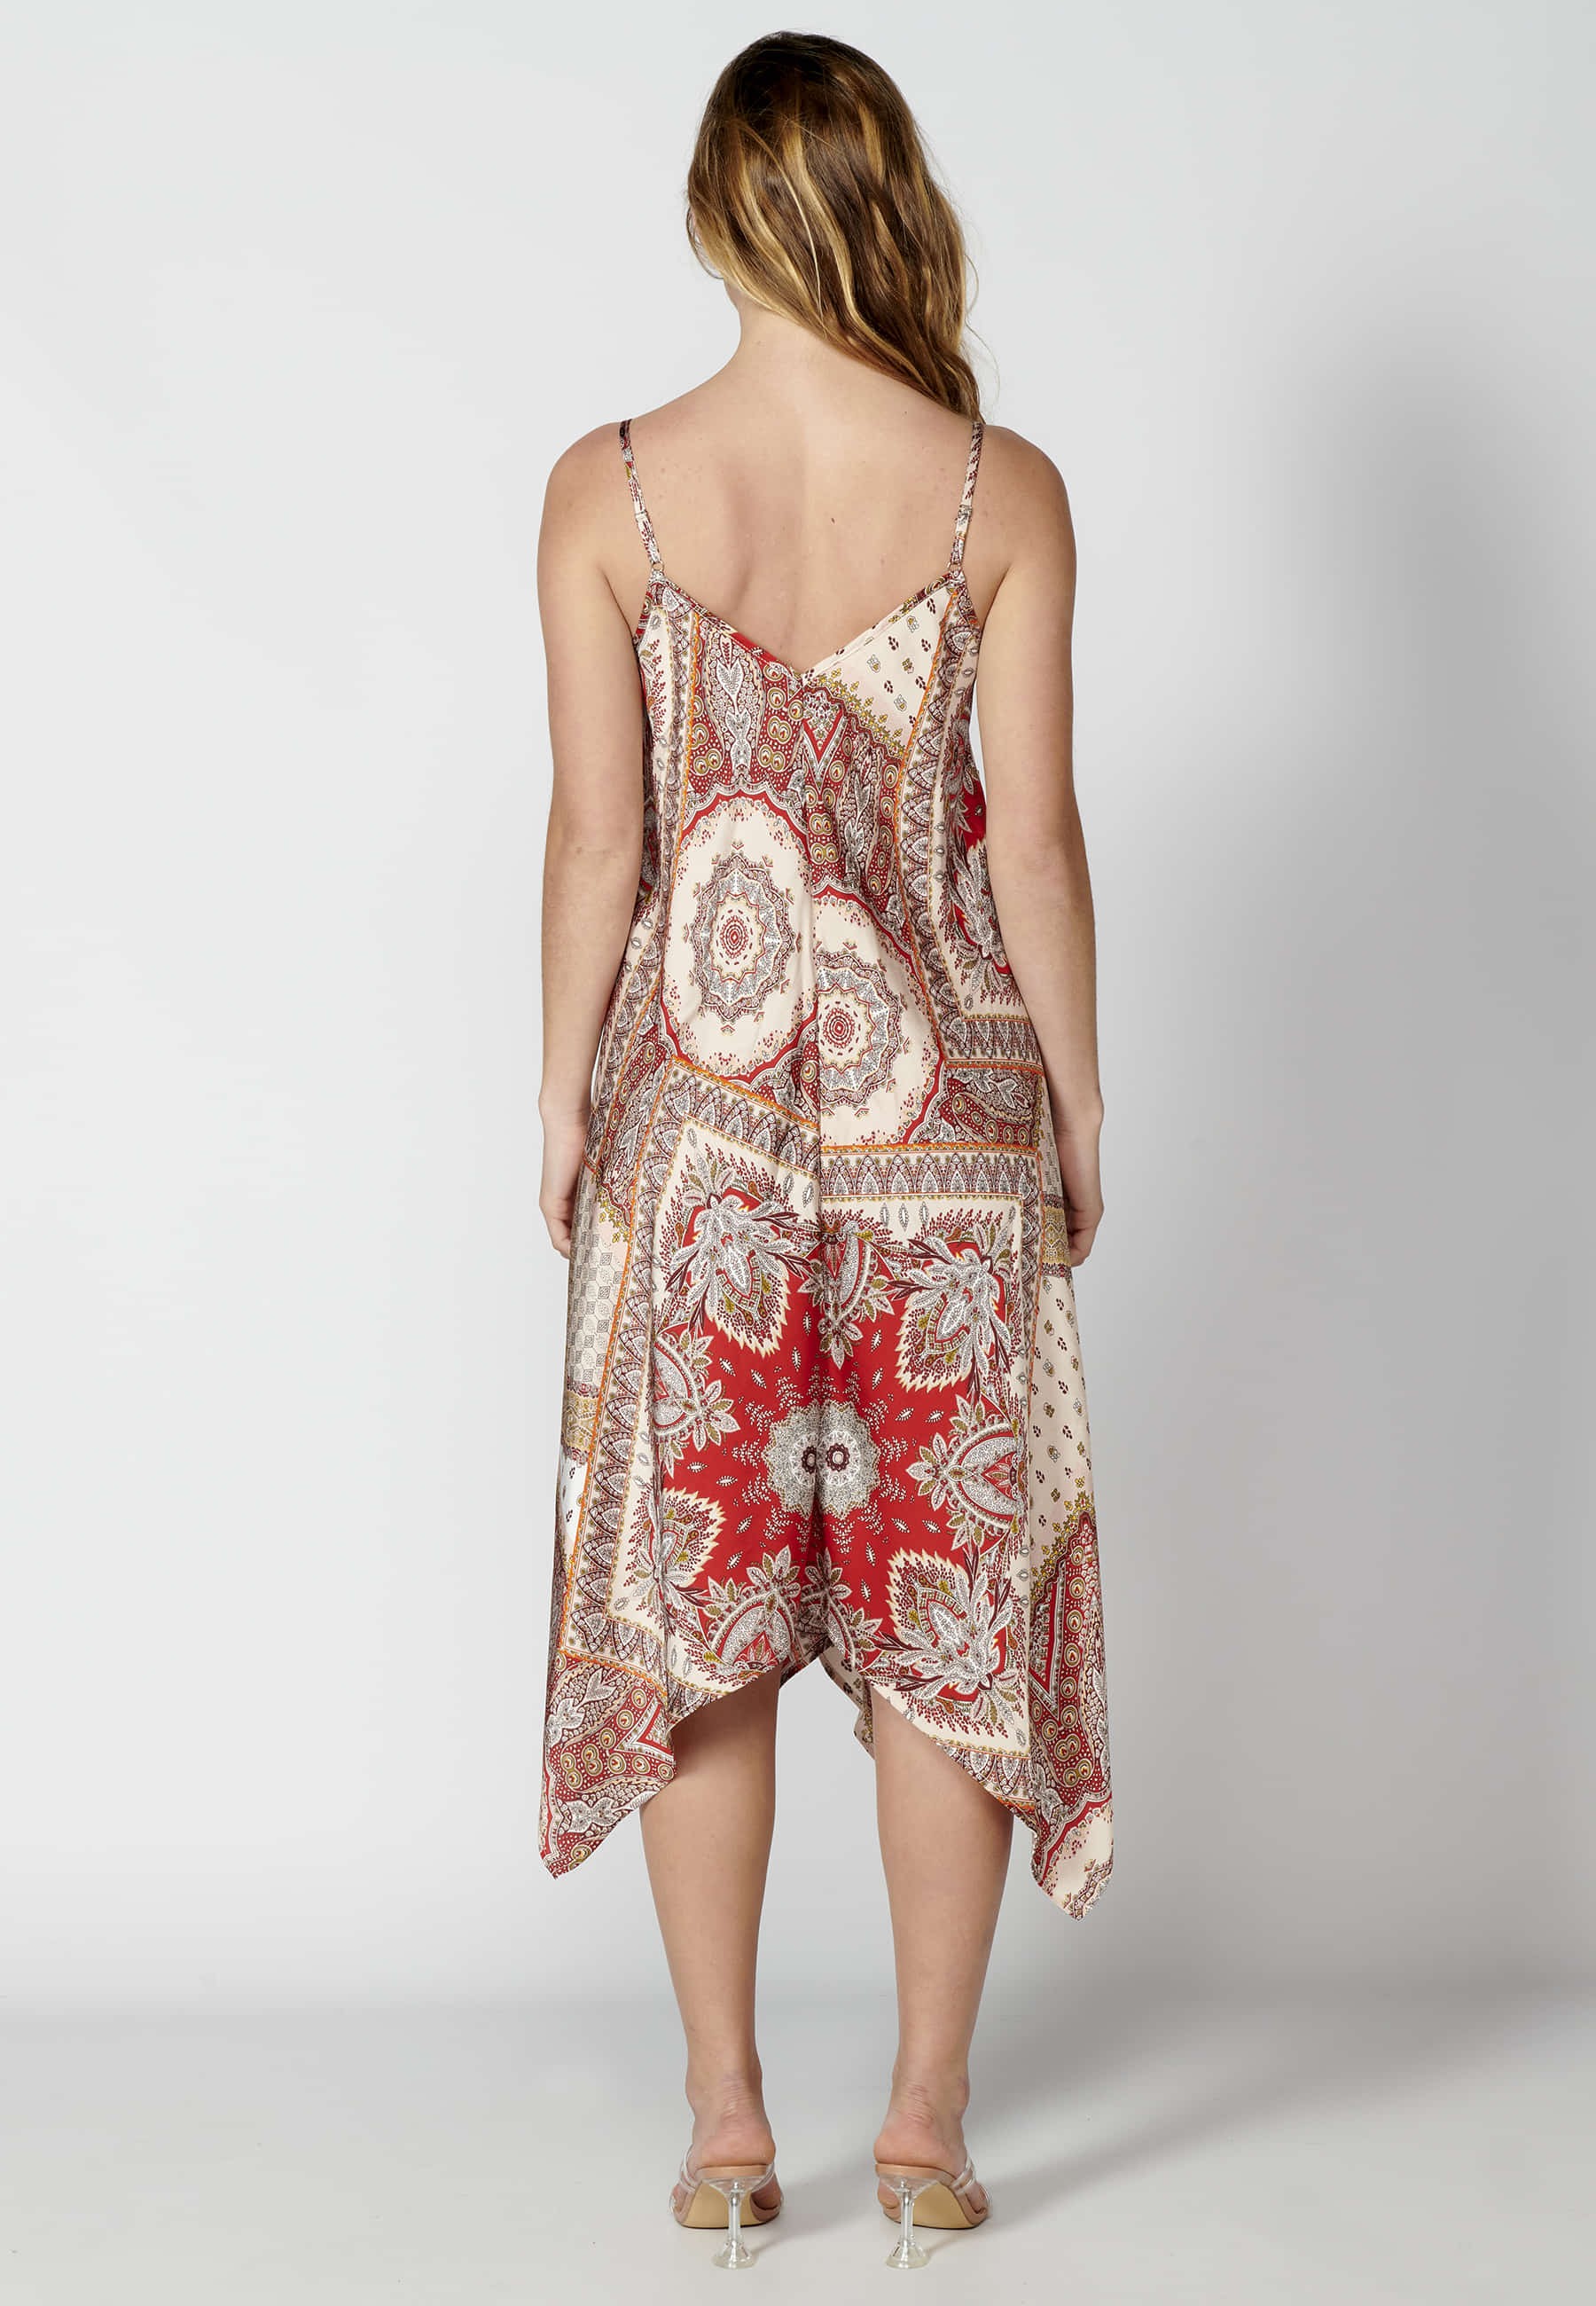 Loose long strappy dress with floral print in Red color for Women